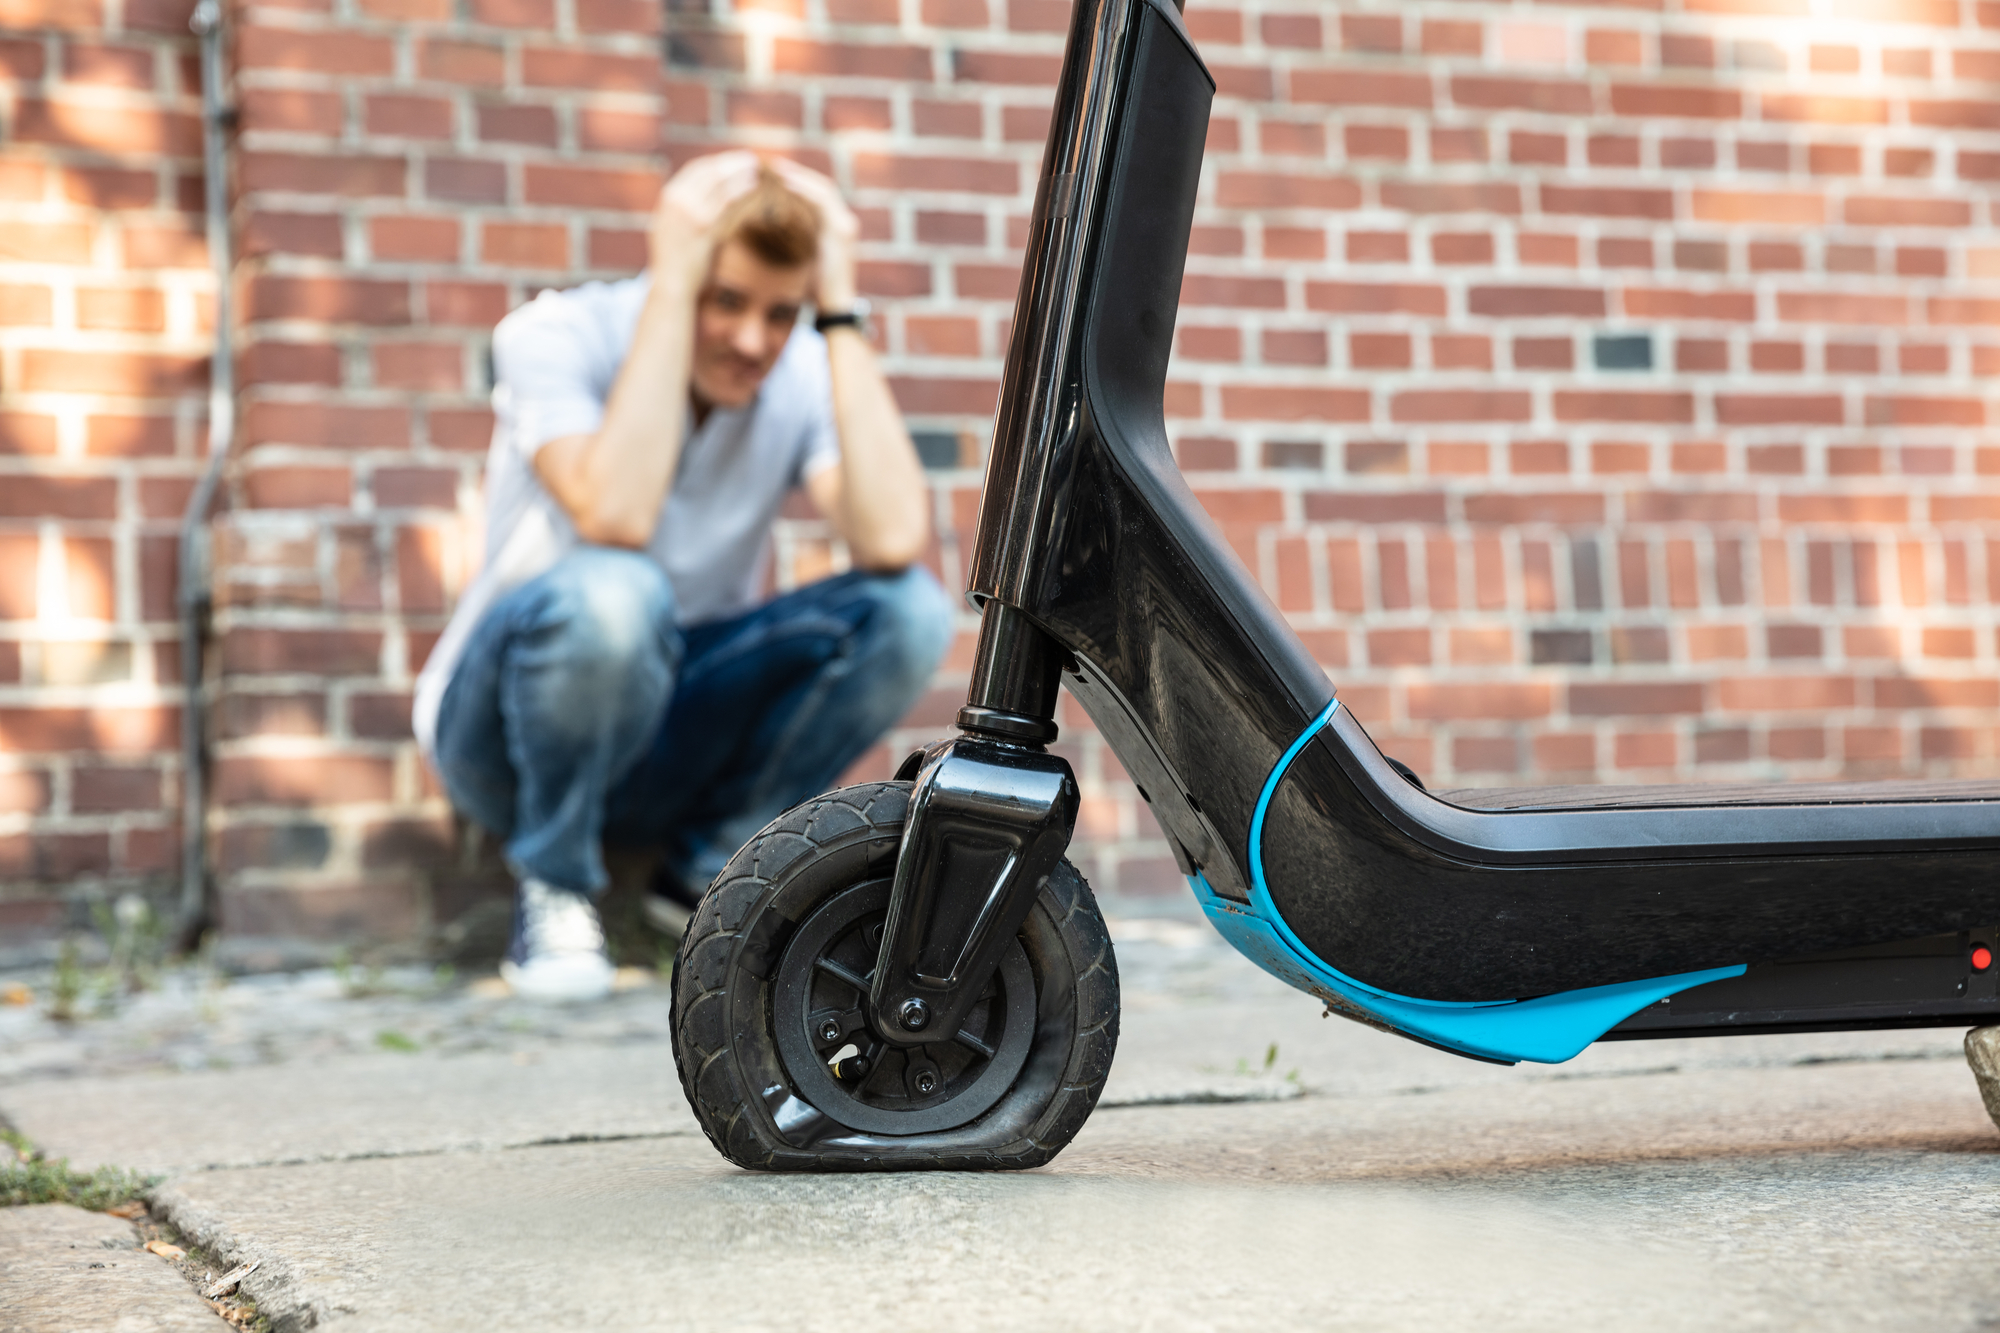 wheel puncture on an electric scooter